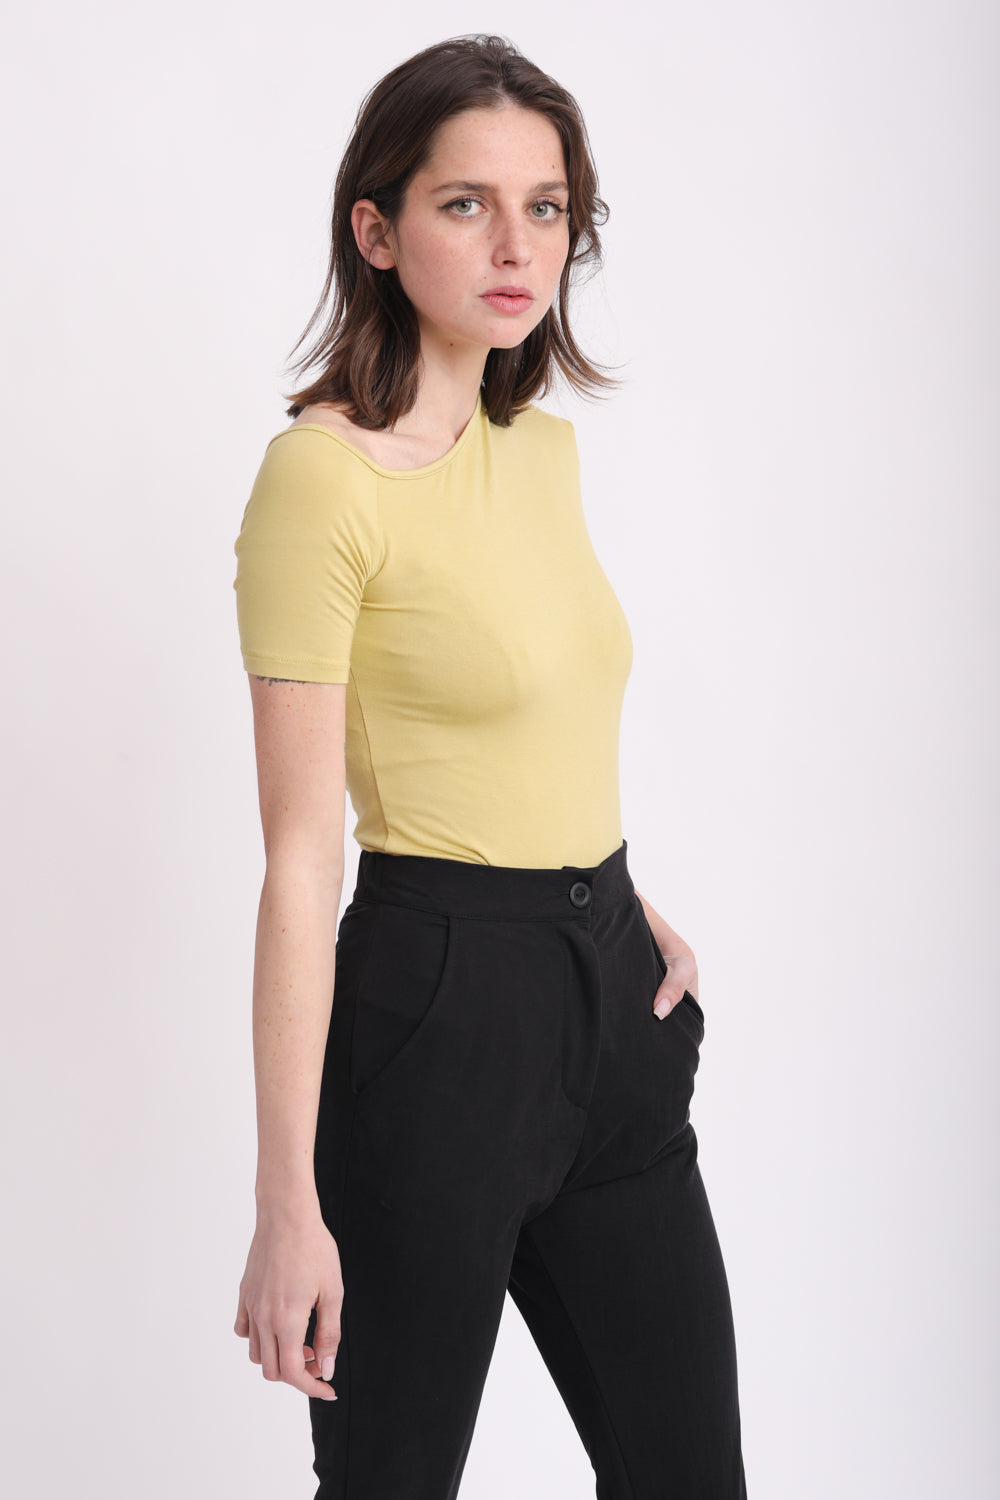 Miss Yellow Top